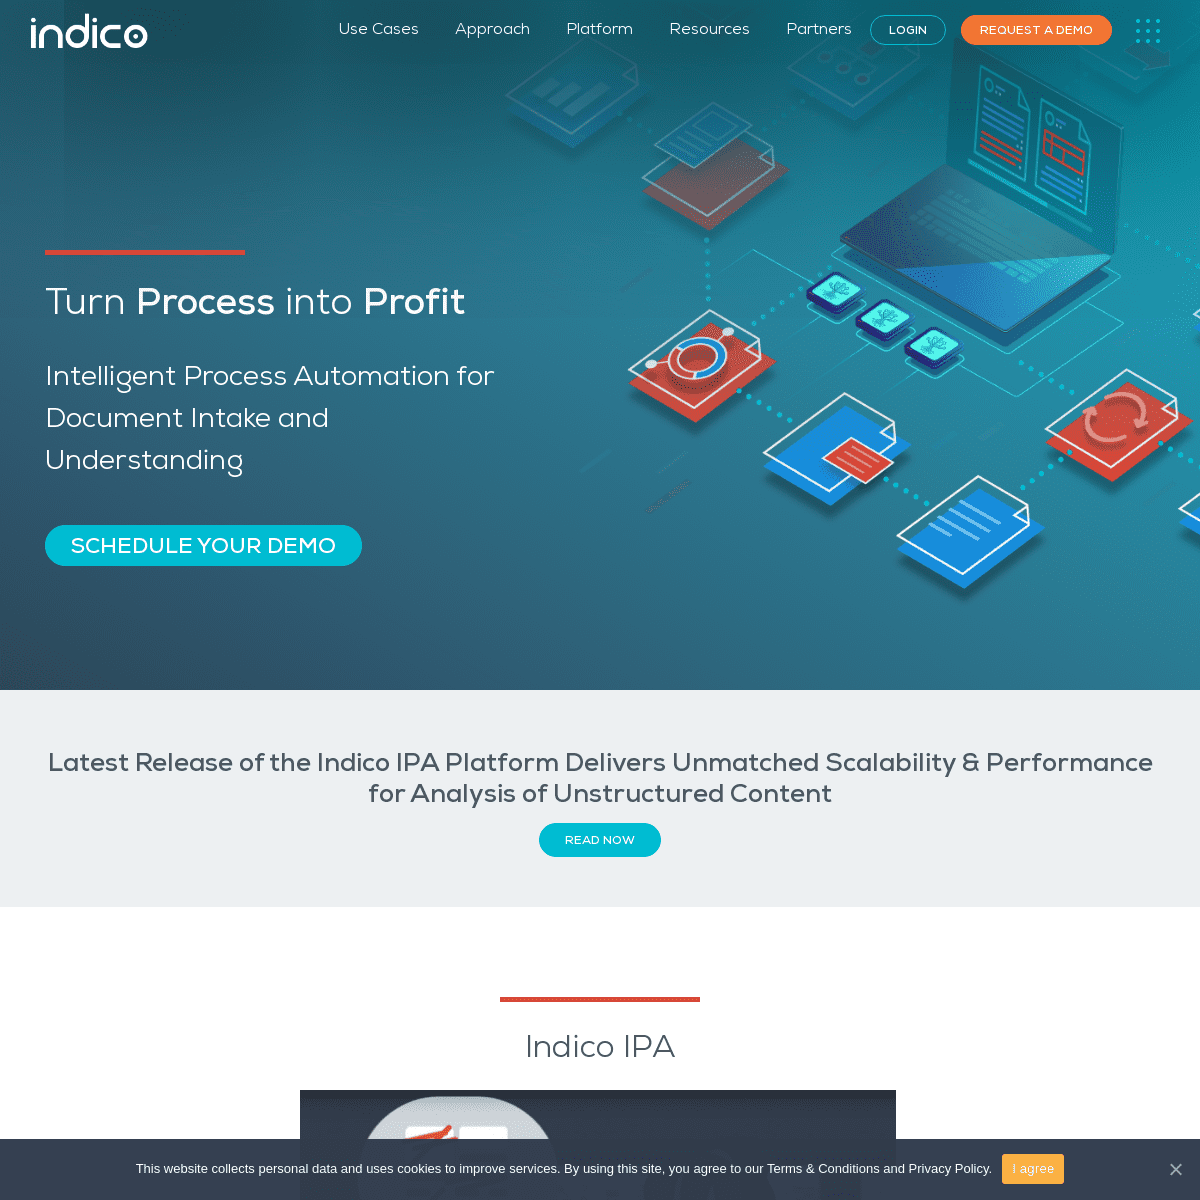 A complete backup of https://indico.io